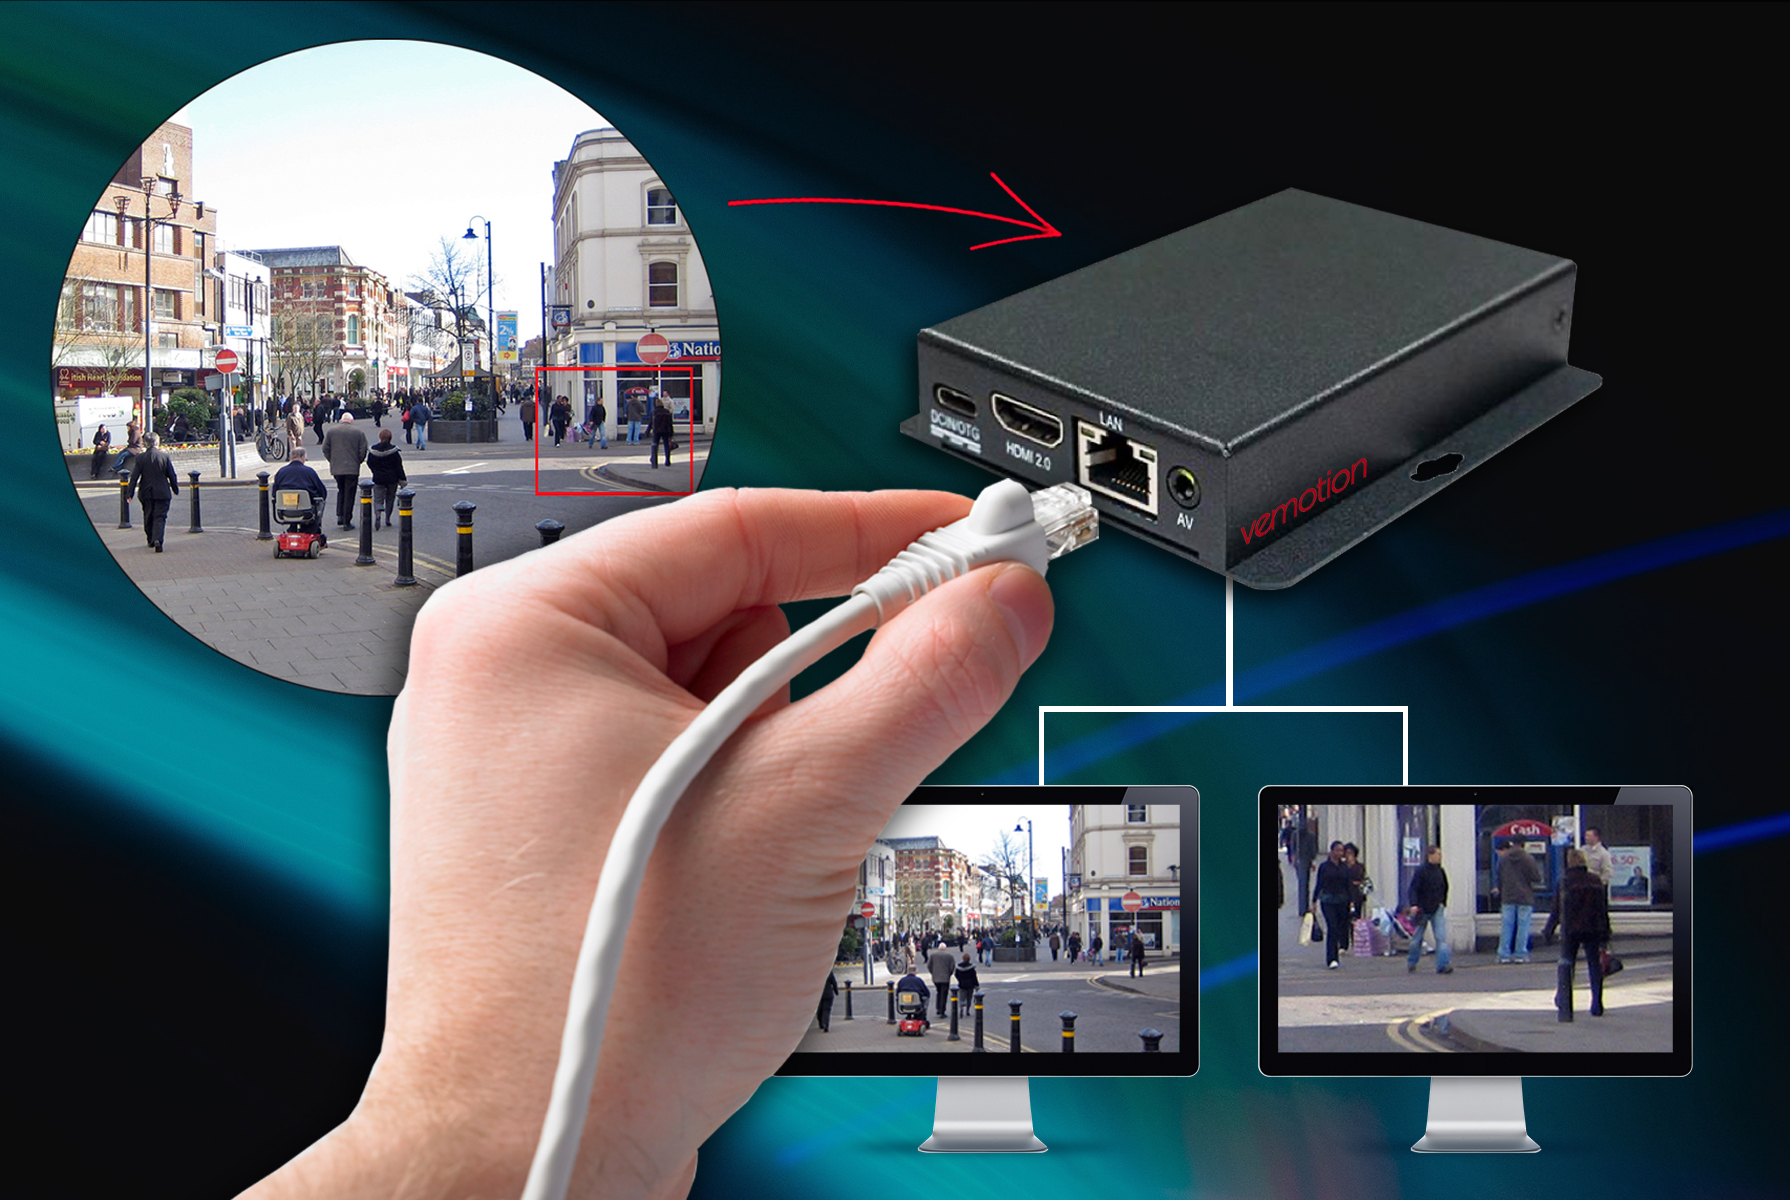 VB-200 Small form factor 2-channel live video encoder and recorder